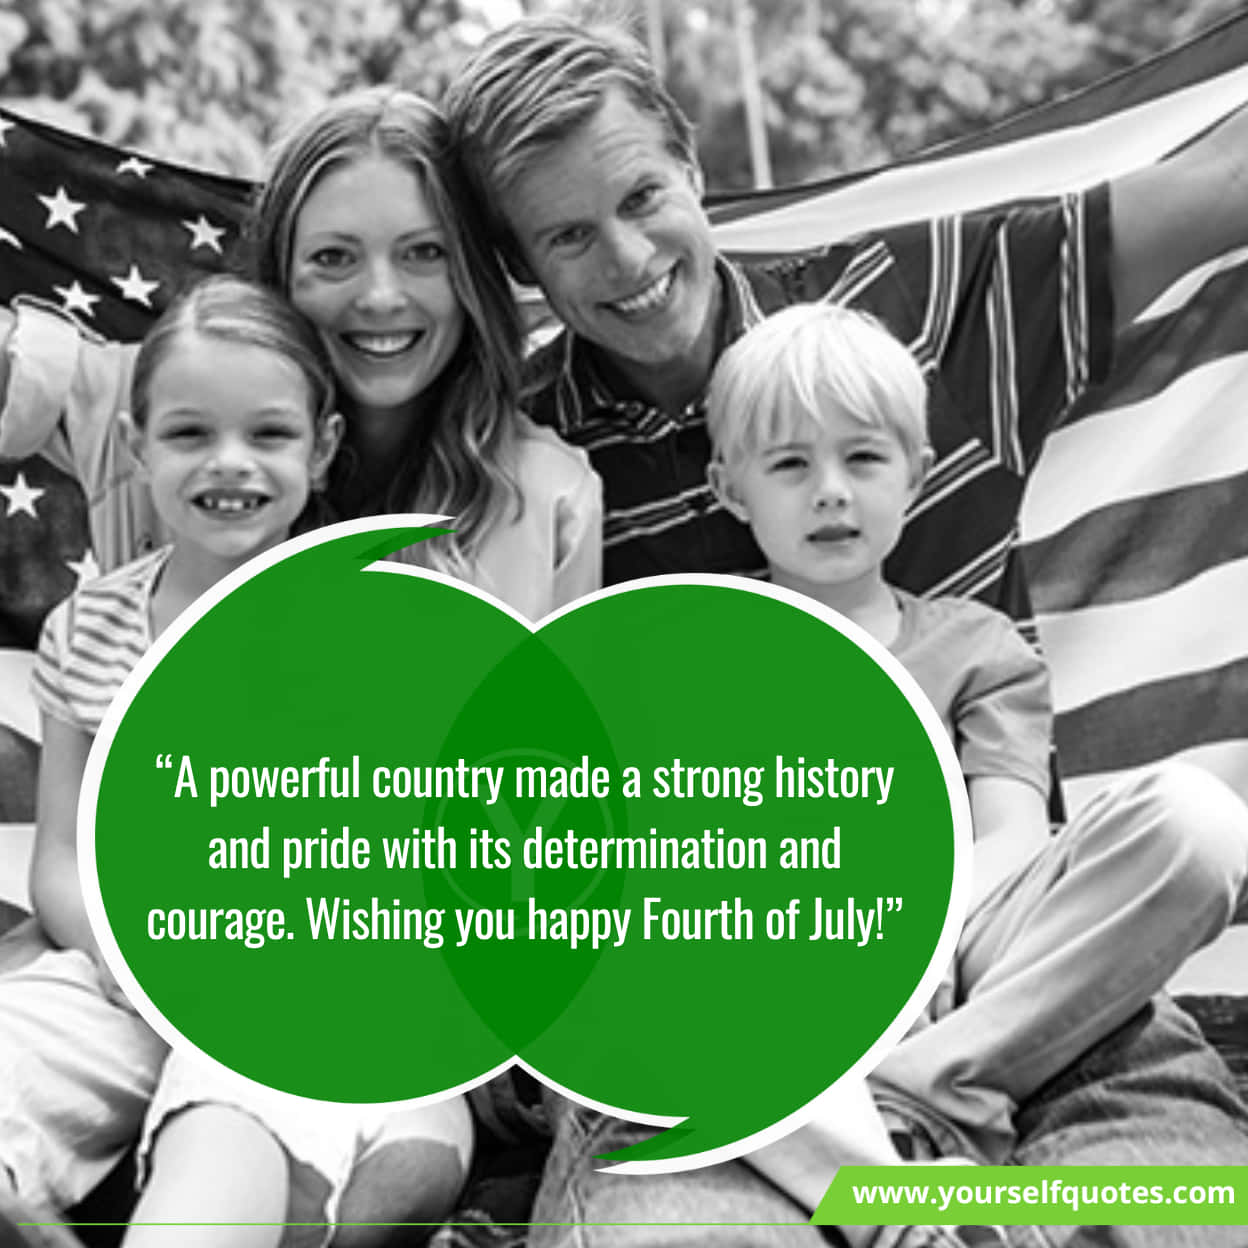 Inspirational Quotes On Happy 4th of July